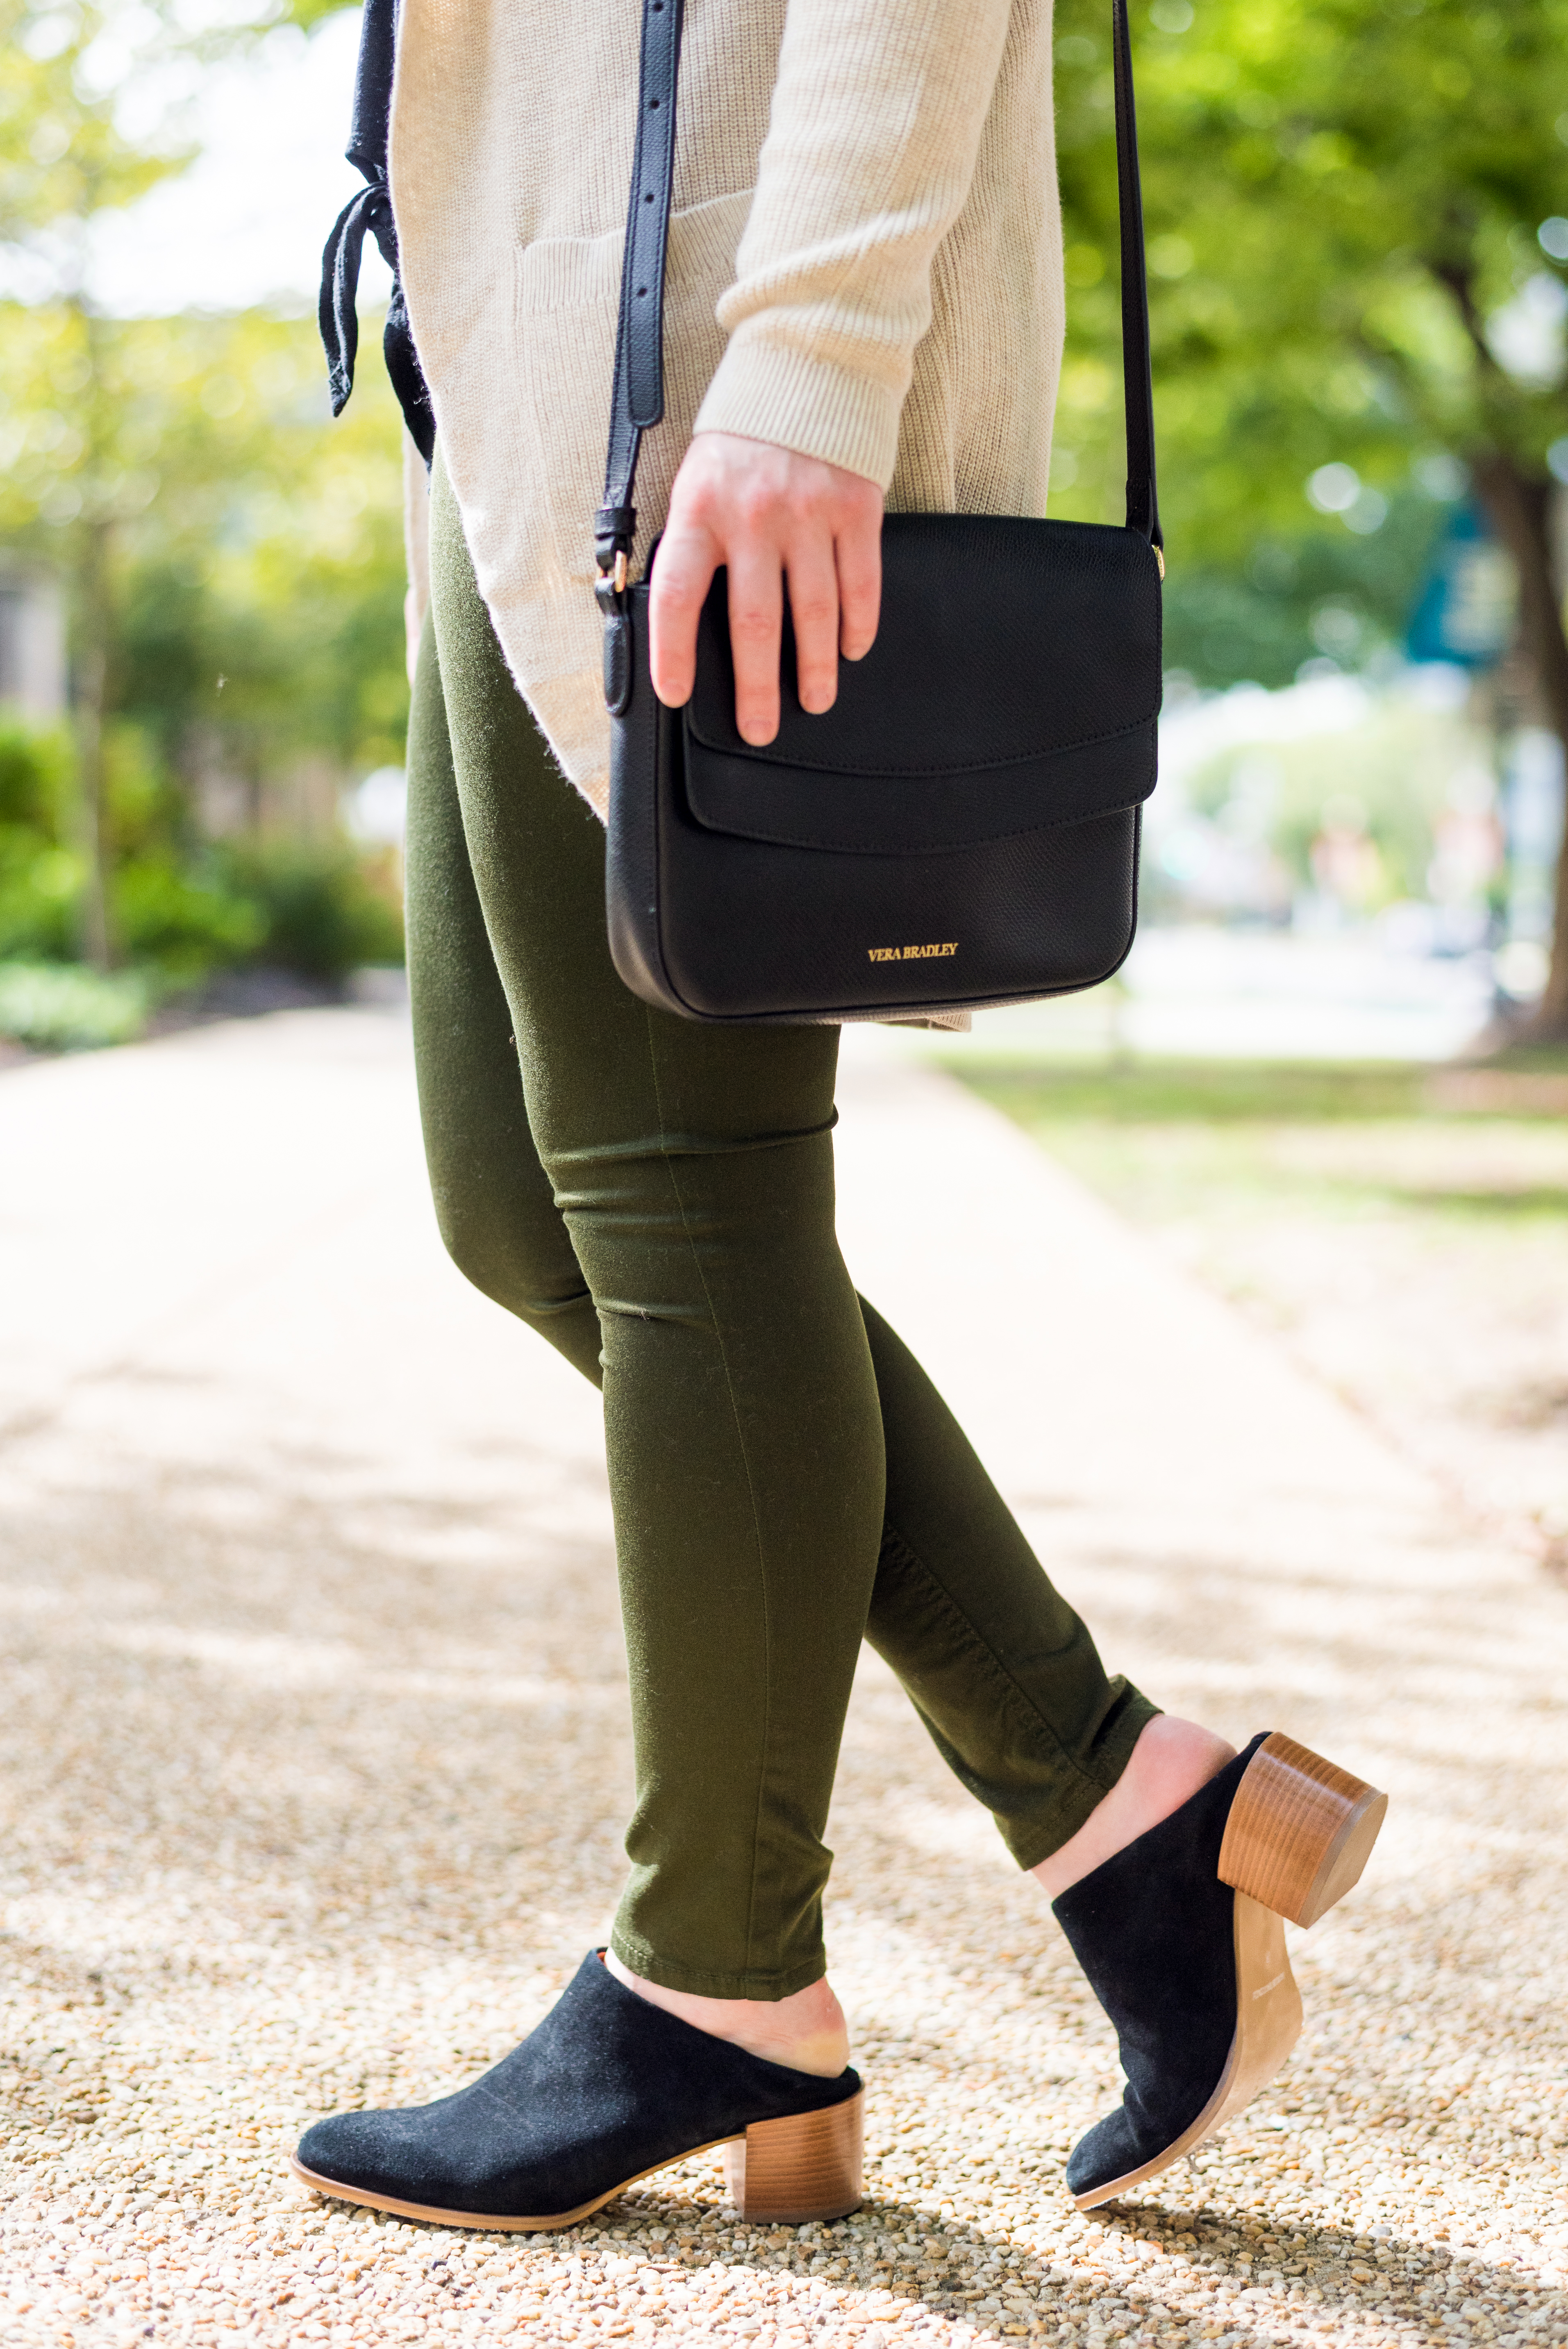 DC woman blogger wearing Everlane the Suede Heel Mule